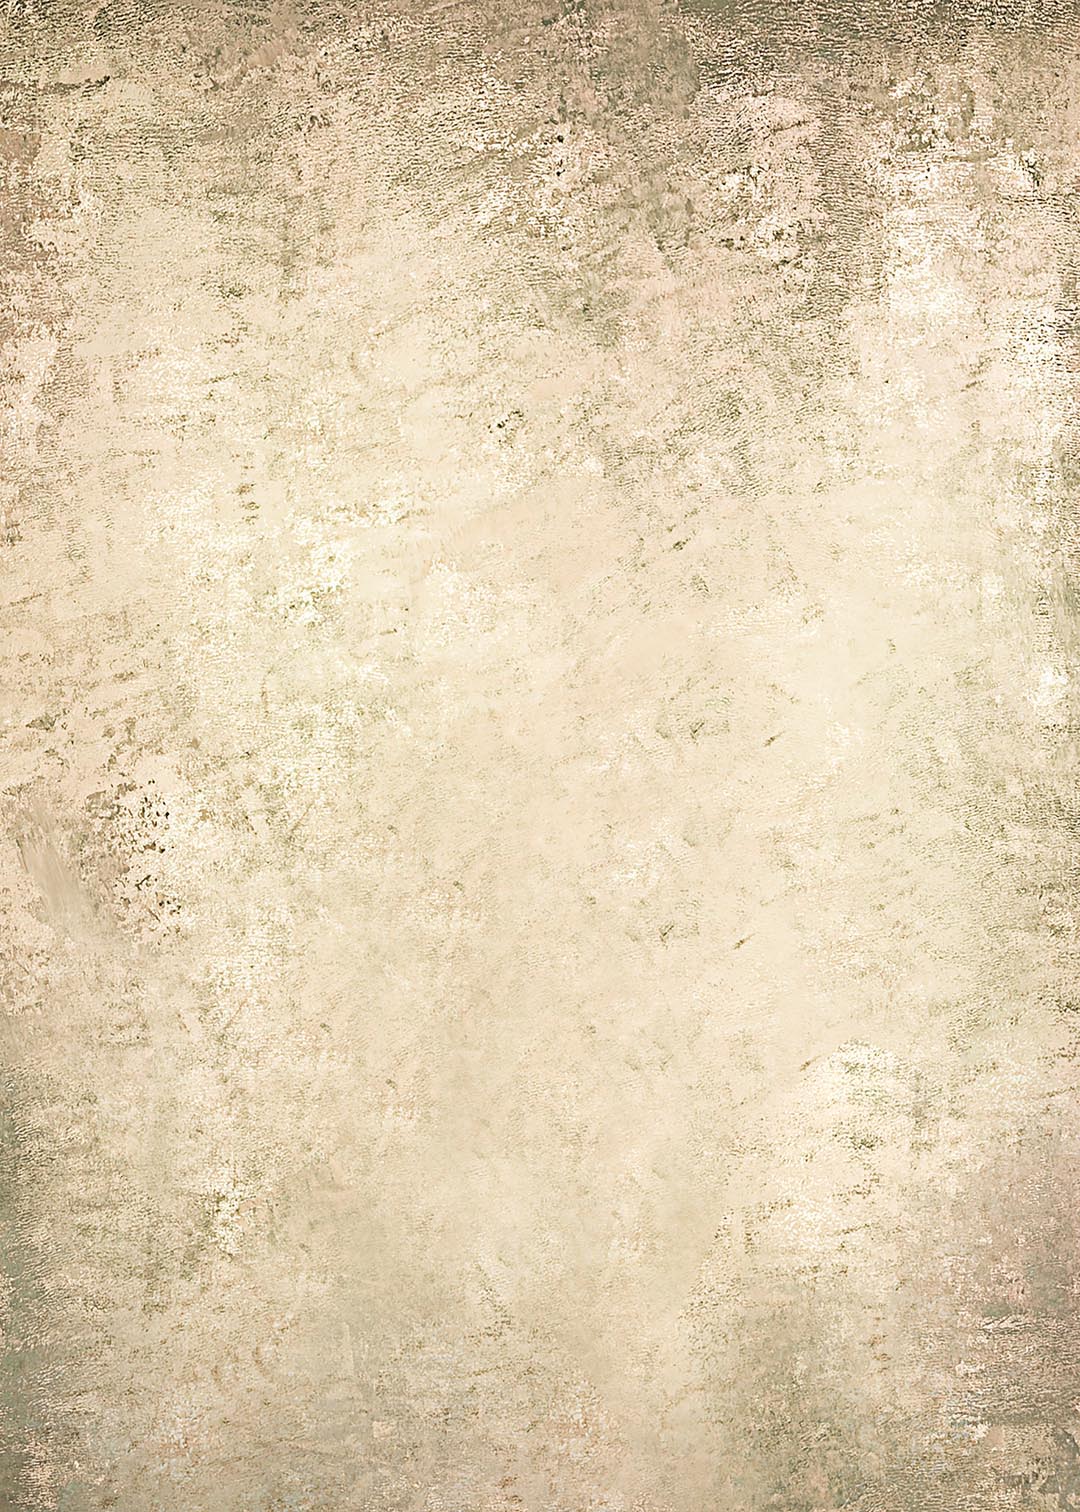 Kate Abstract Texture Beige Backdrop Designed by Kate Image